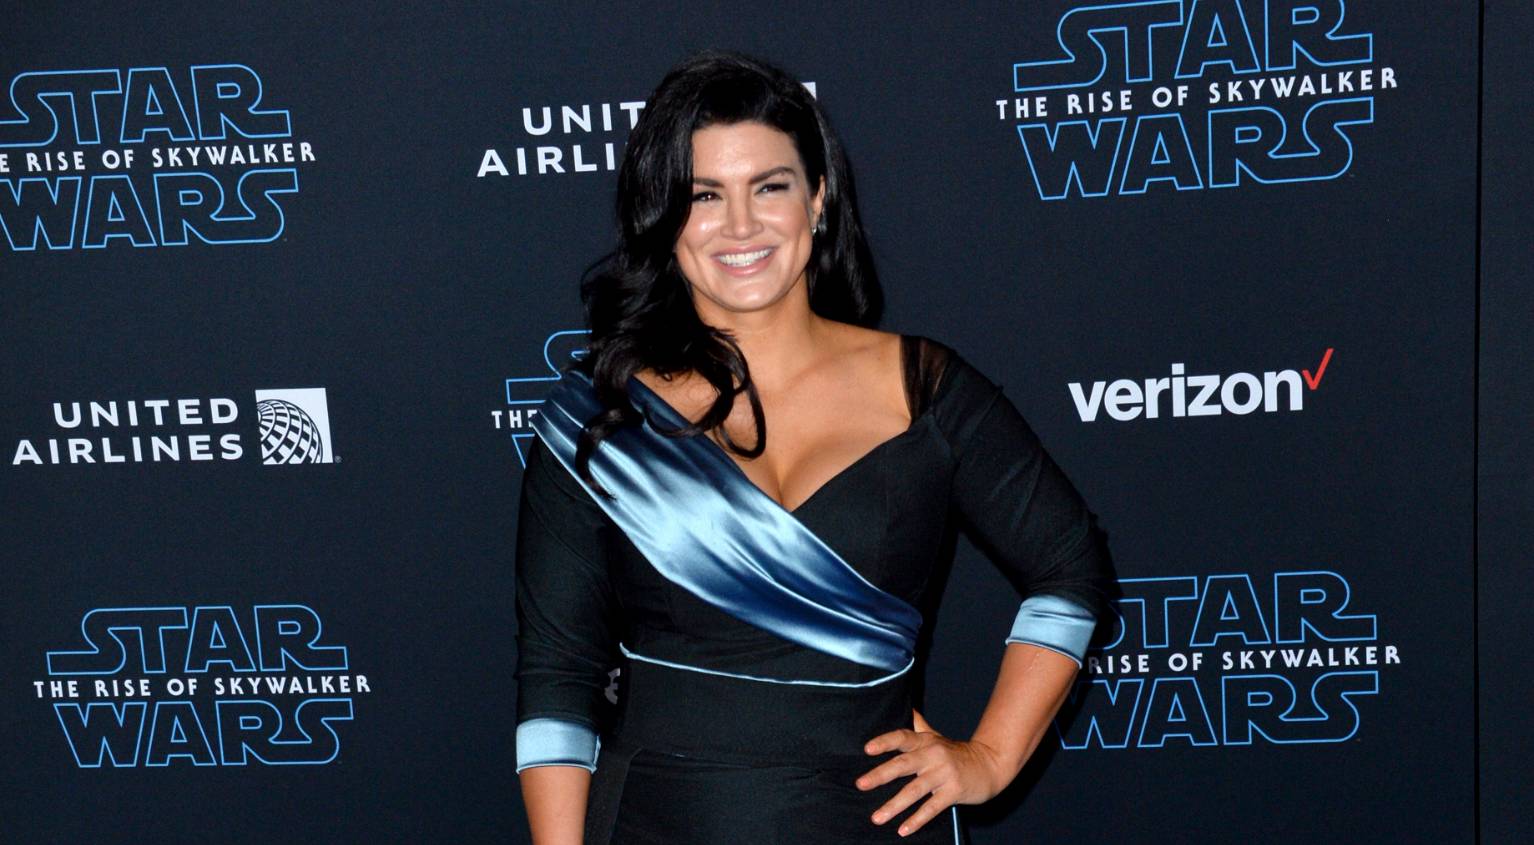 Should Gina Carano be Fired From The Mandalorian and 